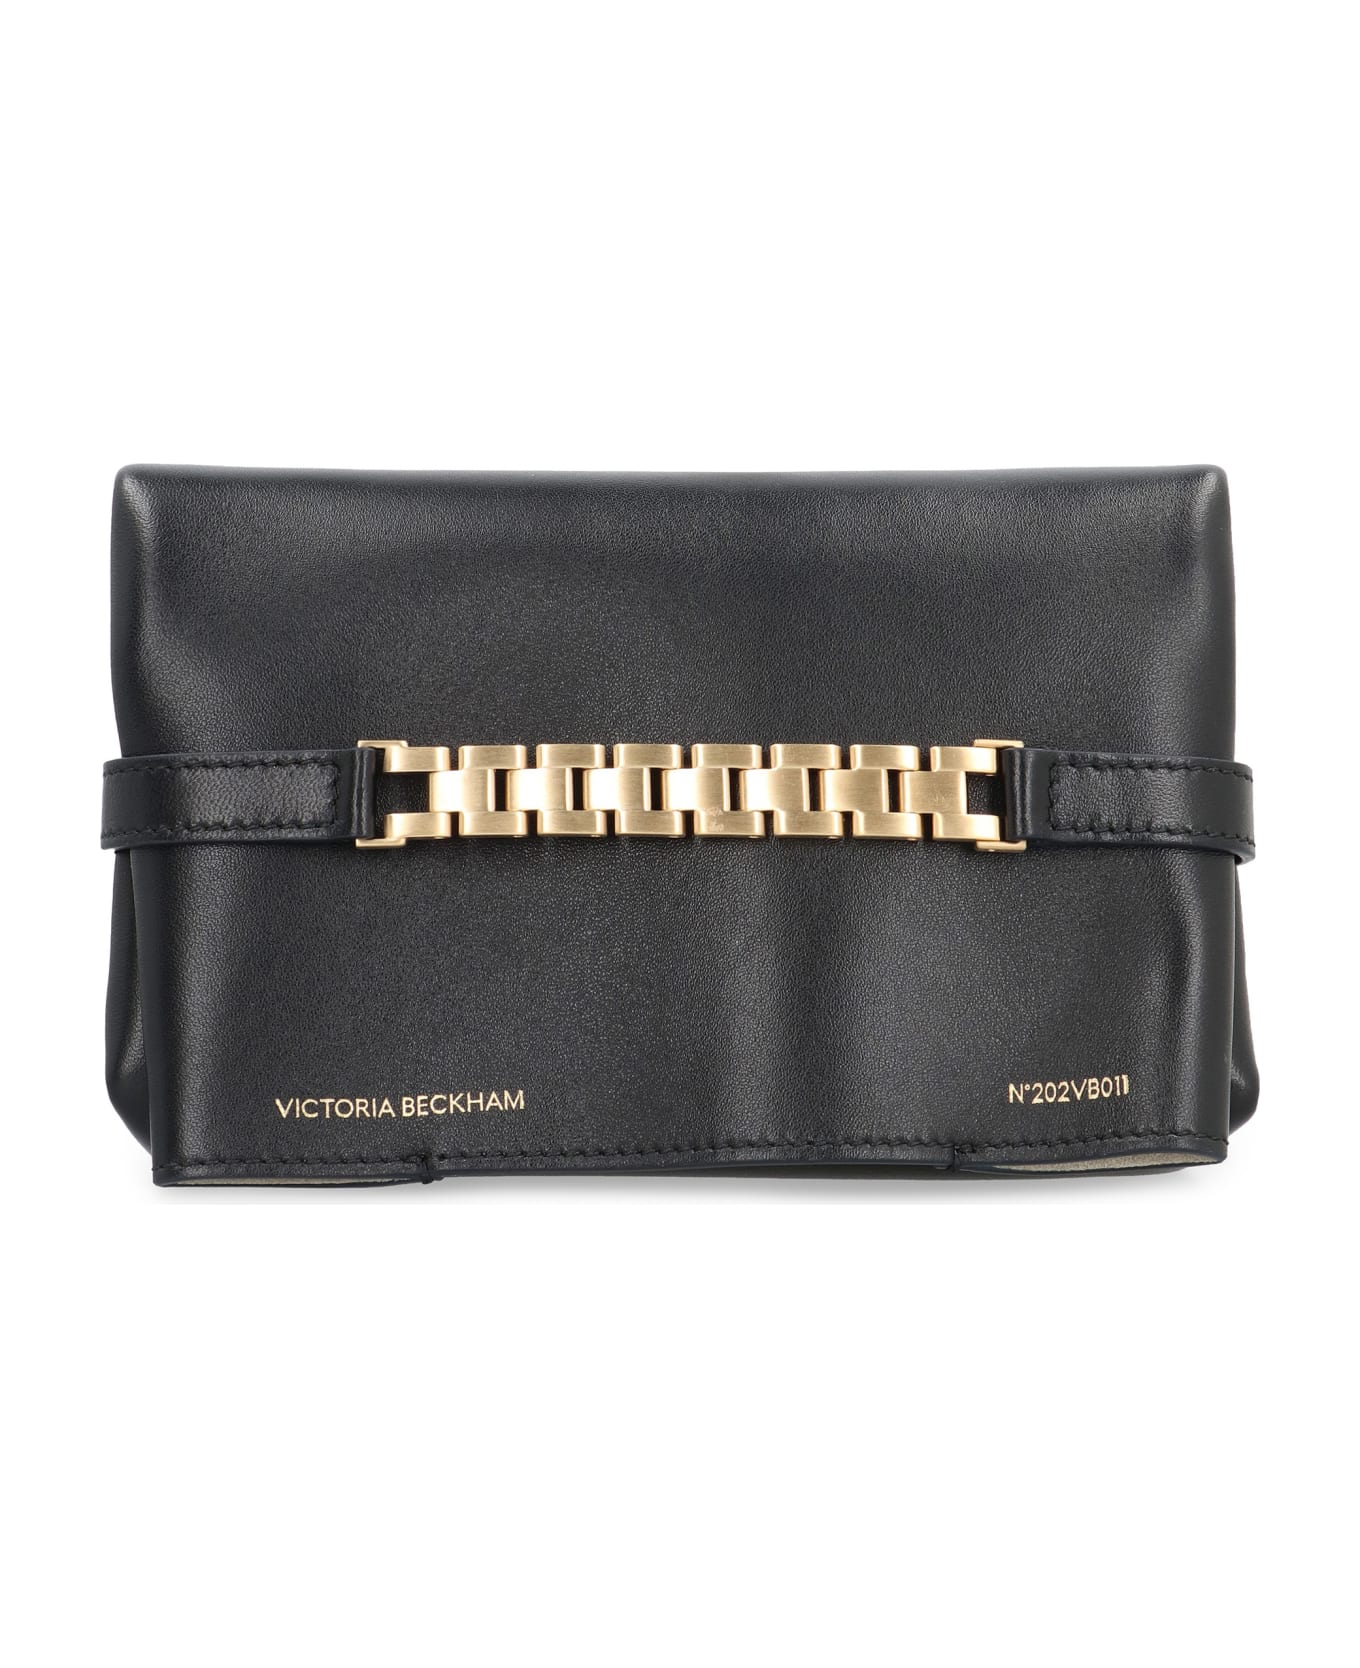 Victoria Beckham Leather Mini Pouch - Black クラッチバッグ